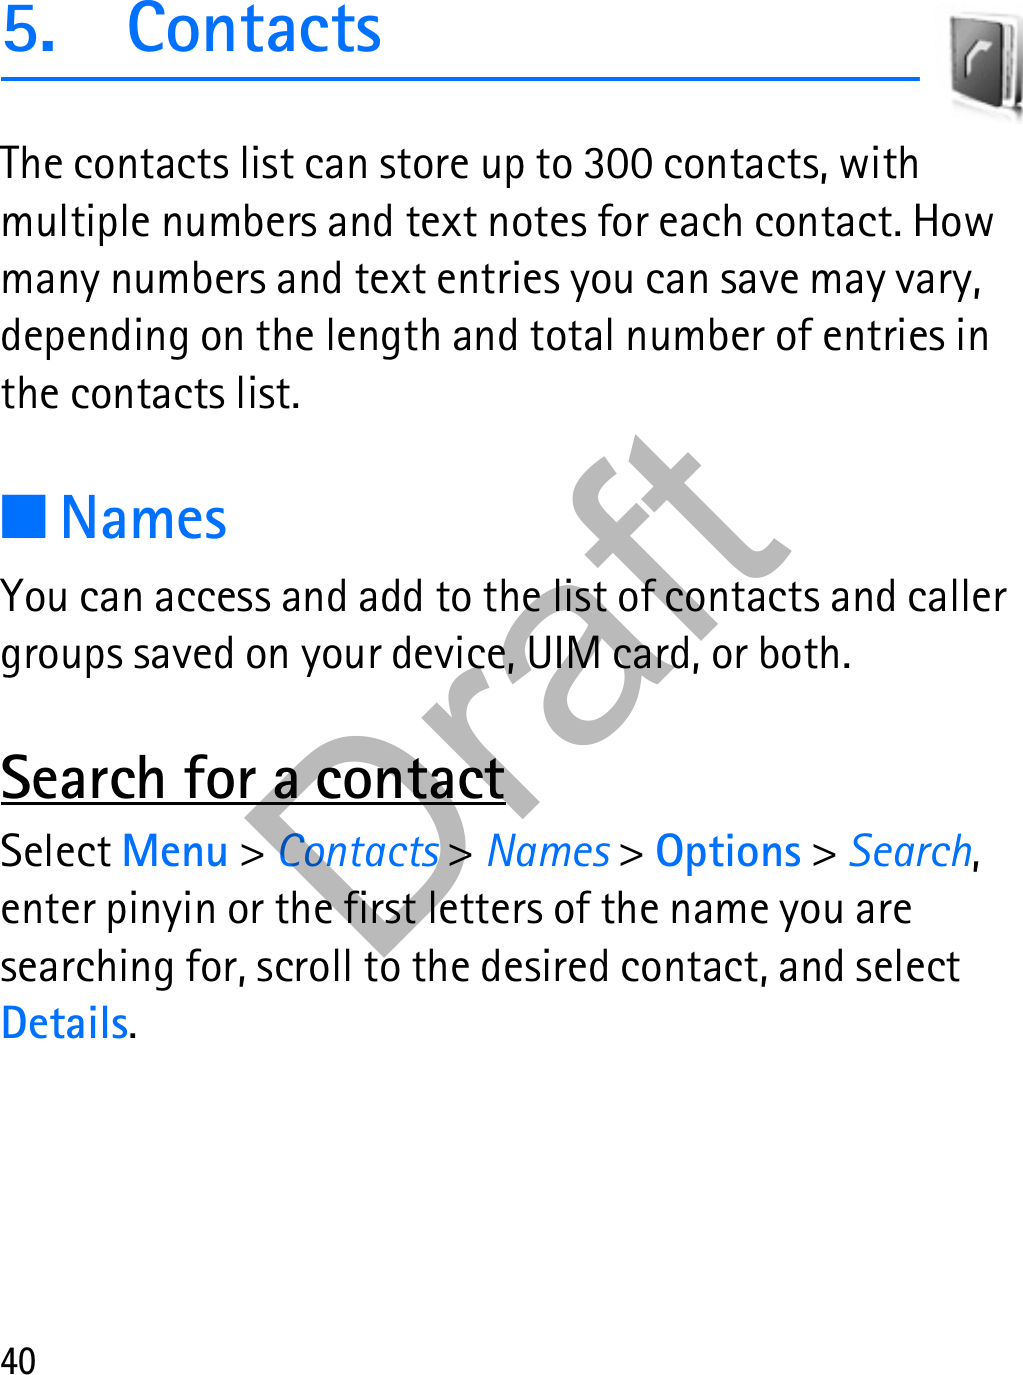 405. ContactsThe contacts list can store up to 300 contacts, with multiple numbers and text notes for each contact. How many numbers and text entries you can save may vary, depending on the length and total number of entries in the contacts list.■NamesYou can access and add to the list of contacts and caller groups saved on your device, UIM card, or both.Search for a contactSelect Menu &gt; Contacts &gt; Names &gt; Options &gt; Search, enter pinyin or the first letters of the name you are searching for, scroll to the desired contact, and select Details.Draft